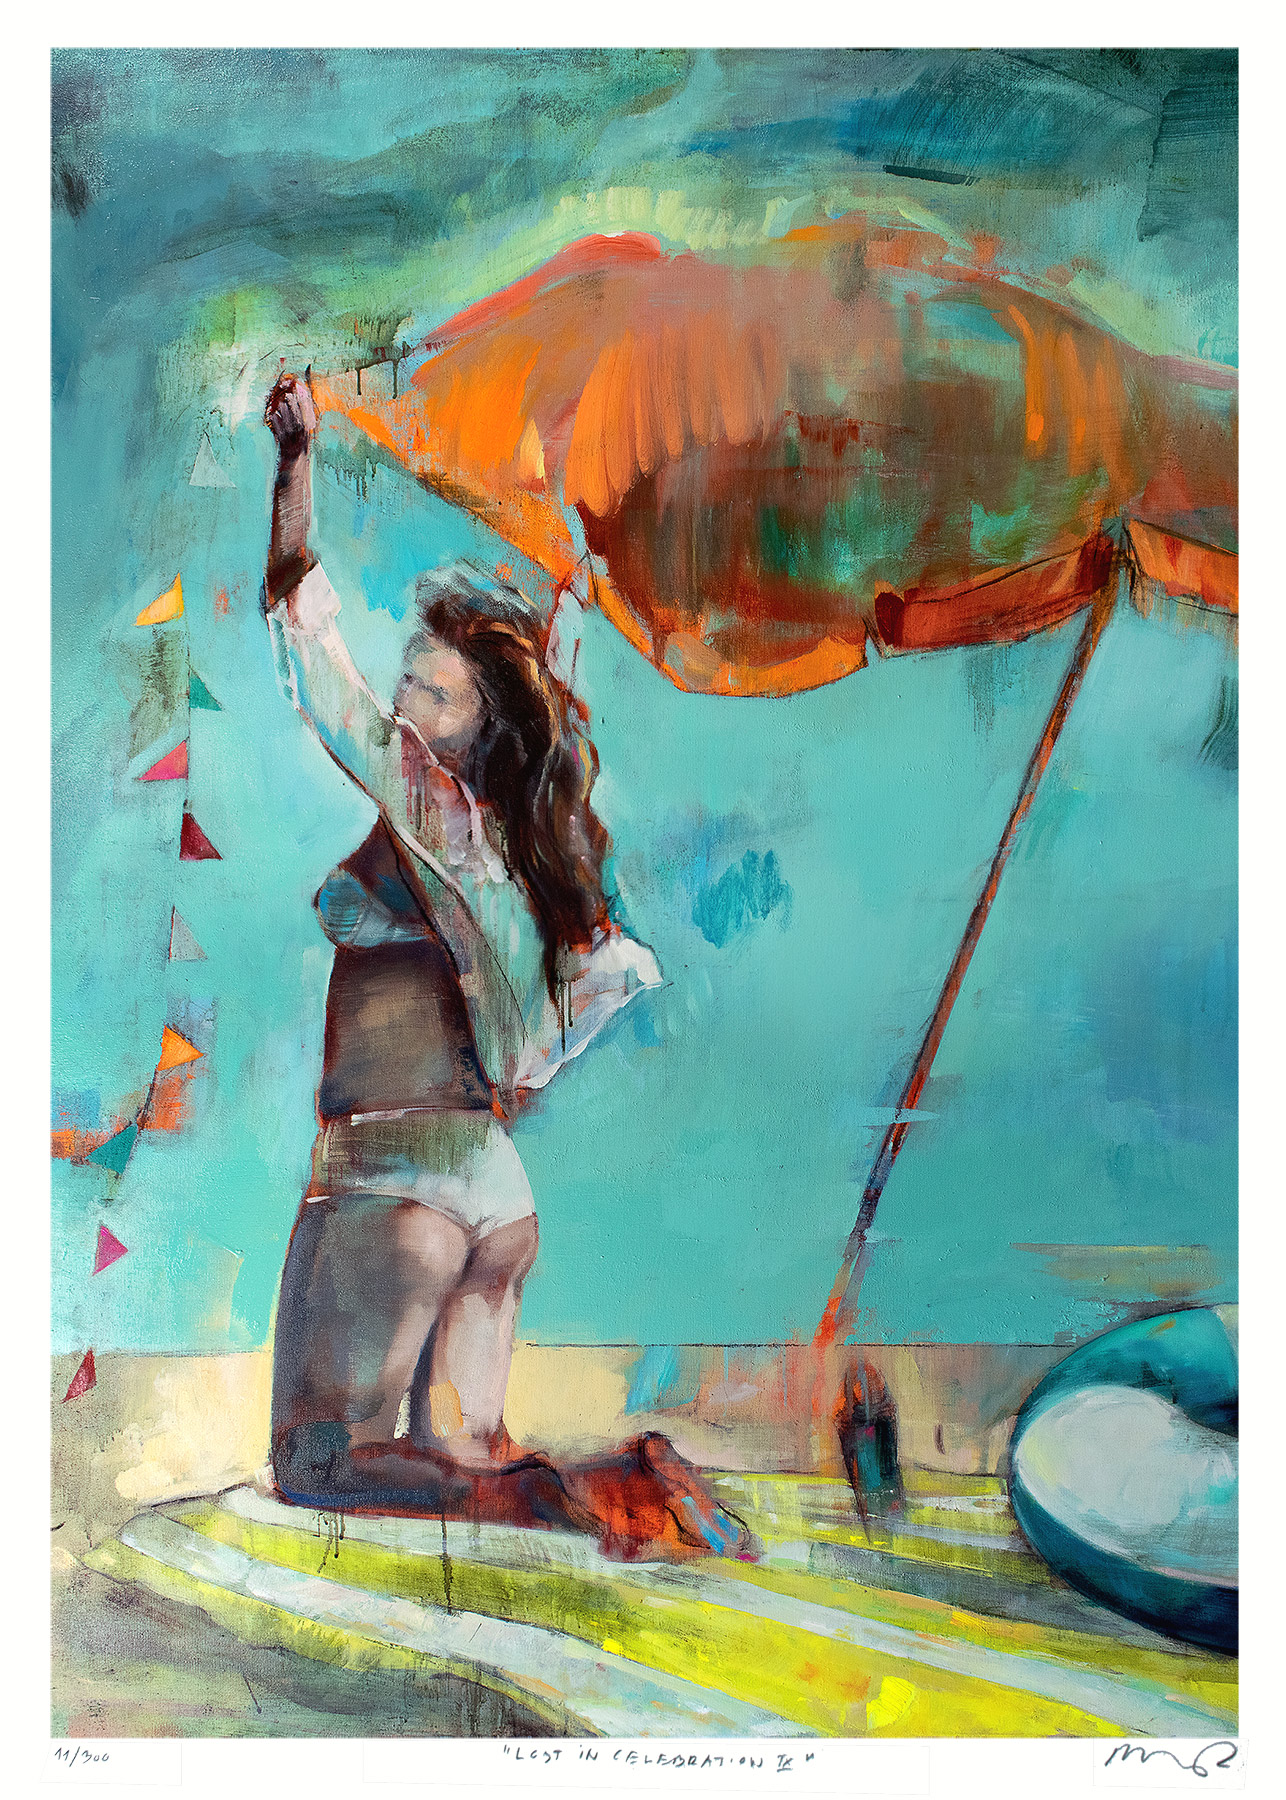 posters-prints, giclee-print, aesthetic, colorful, figurative, graphical, landscape, portraiture, bodies, nature, oceans, people, sky, gold, green, orange, turquoise, yellow, ink, beach, beautiful, danish, decorative, design, female, interior, interior-design, modern, modern-art, nordic, plants, posters, pretty, scandinavien, women, Buy original high quality art. Paintings, drawings, limited edition prints & posters by talented artists.